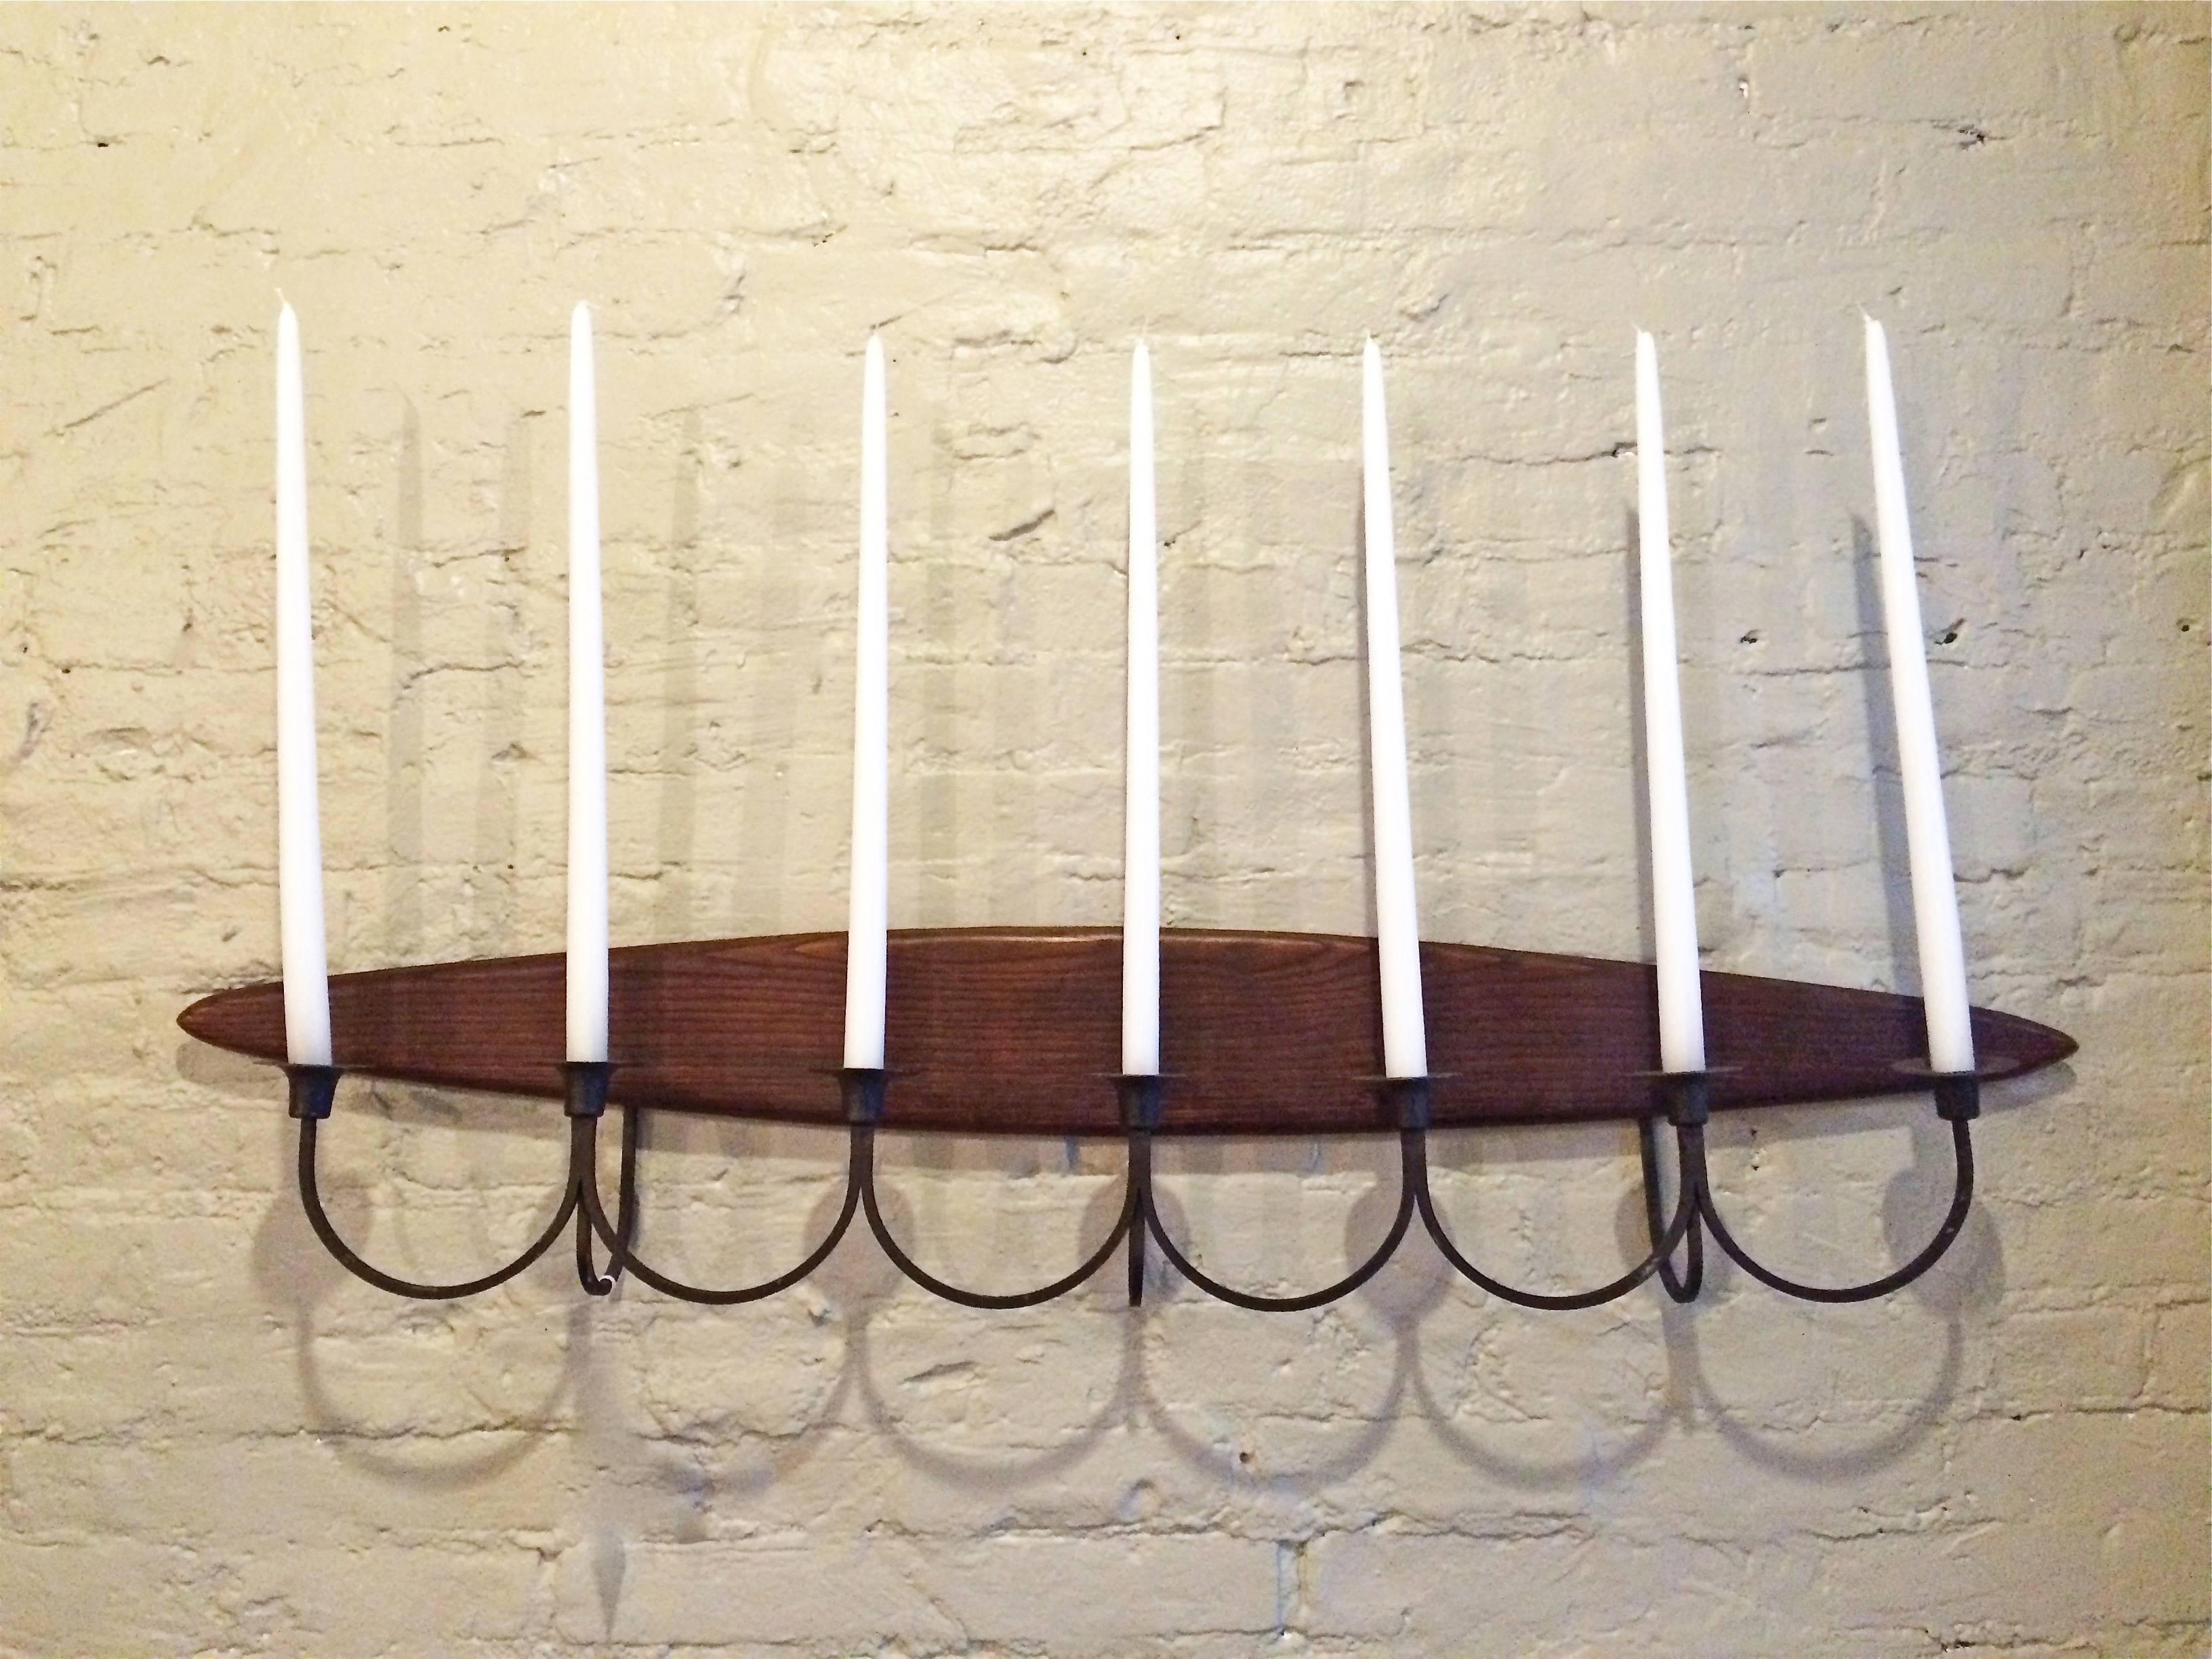 Mid-Century Modern, wall mount, candelabra or candle sconce by Raymor with elliptical shape walnut back and wrought iron candle holders.